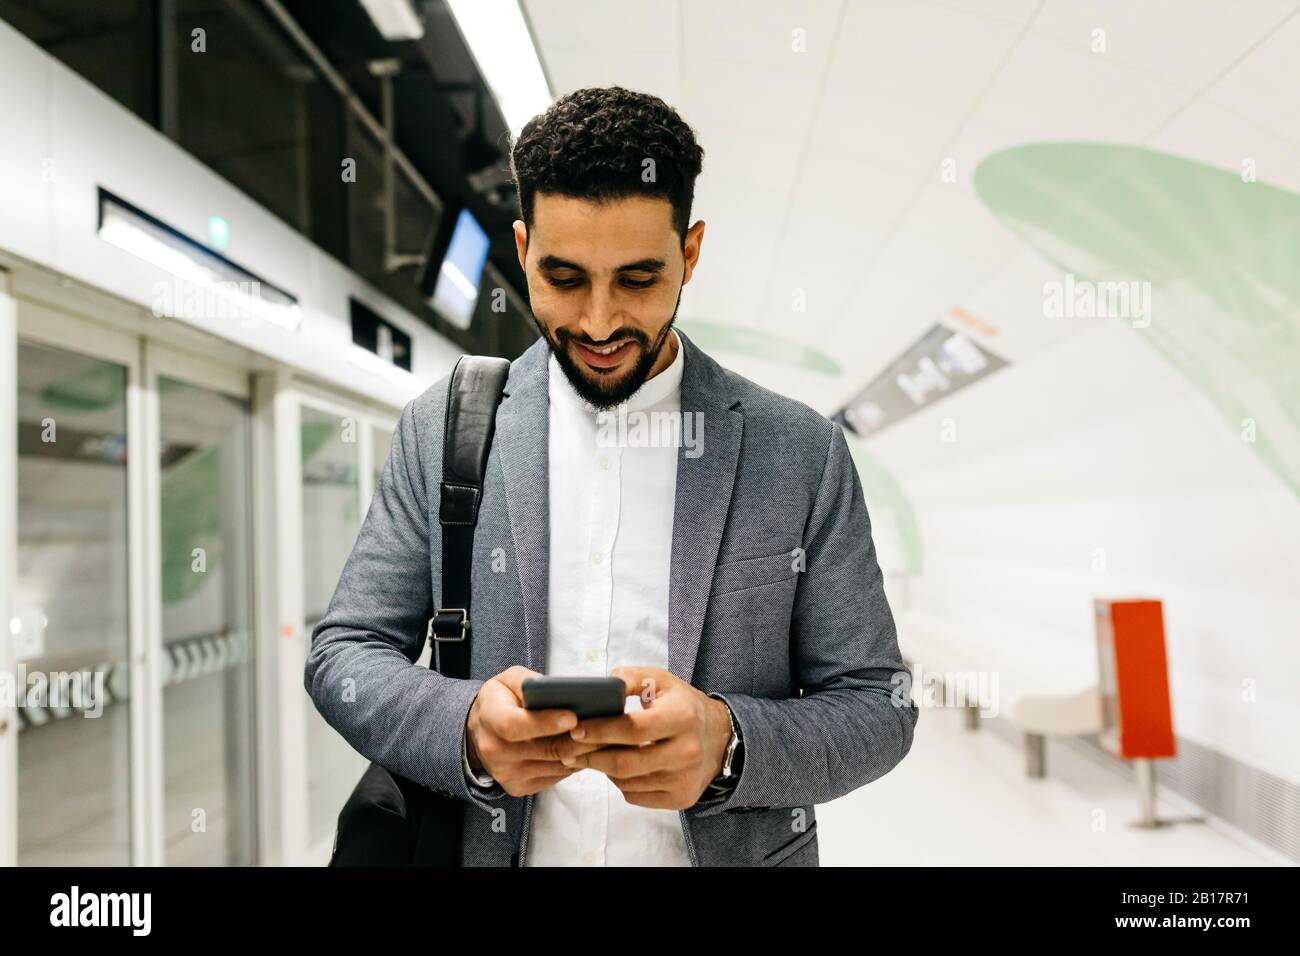 Young businessman using cell phone in subway station Stock Photo